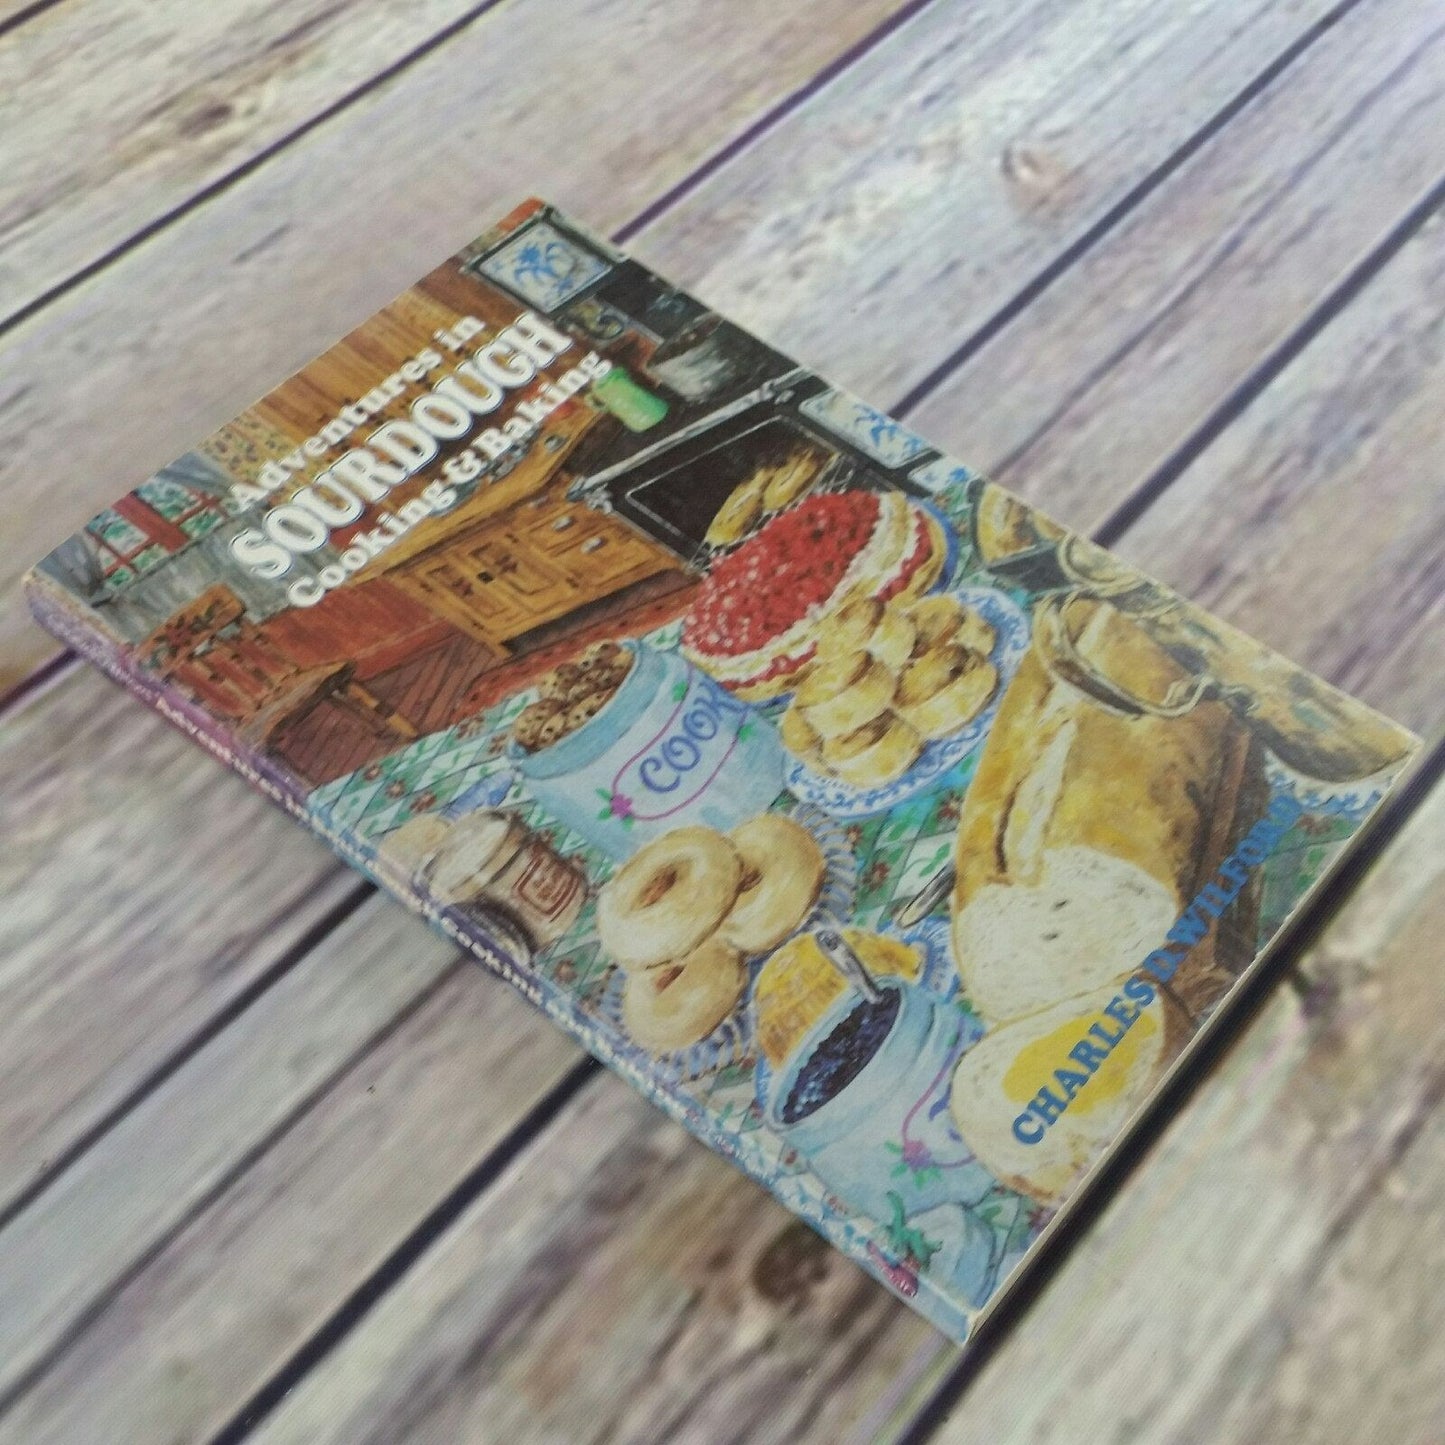 Vintage Sourdough Cookbook Adventures in Sourdough Cooking and Baking Recipes 1977 Charles Wilford Paperback